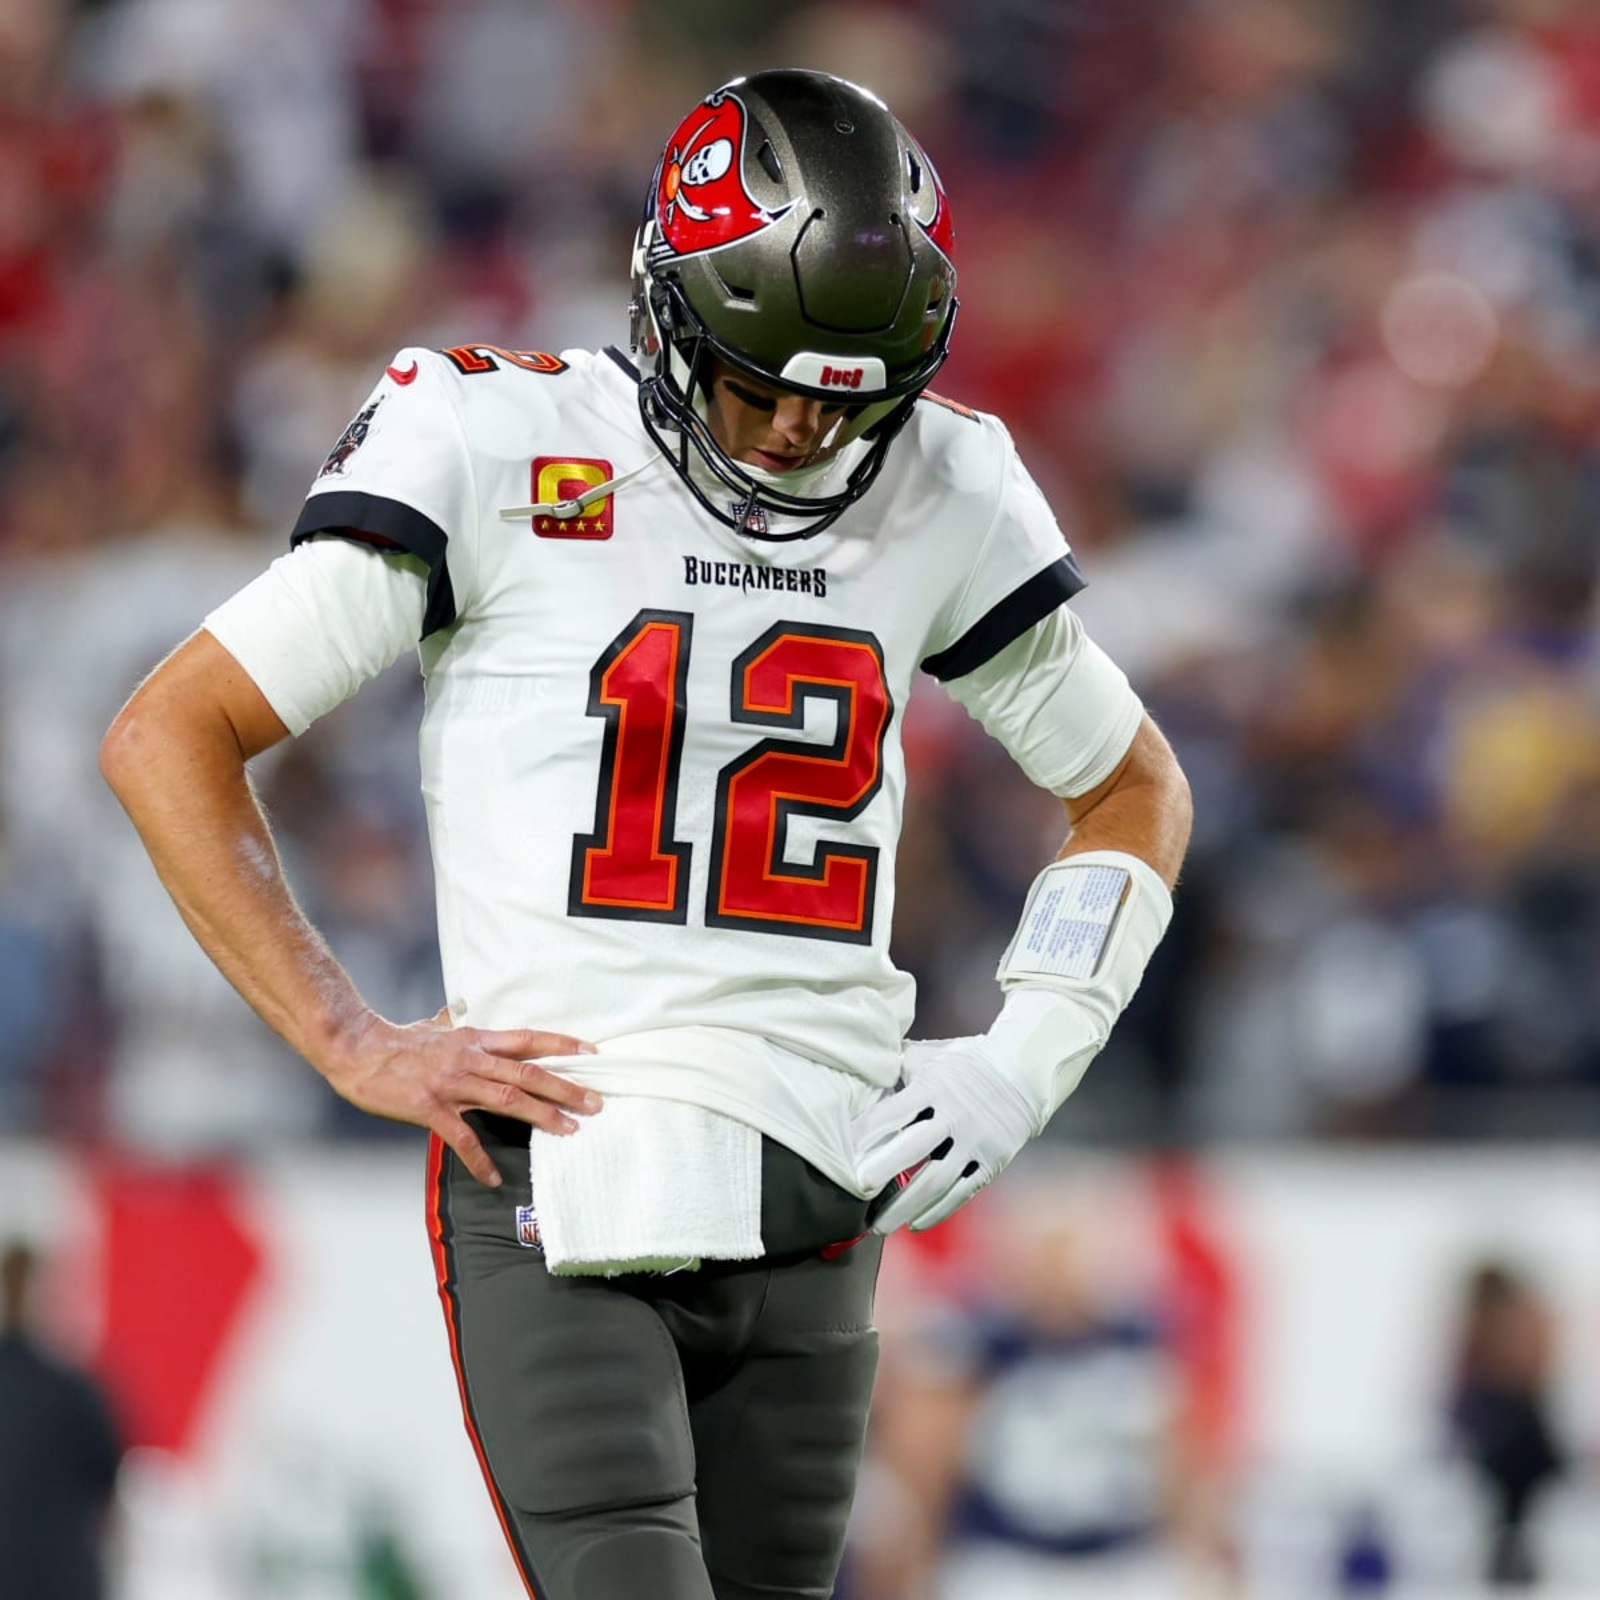 Dallas Cowboys 31-14 Tampa Bay Buccaneers highlights and scores in